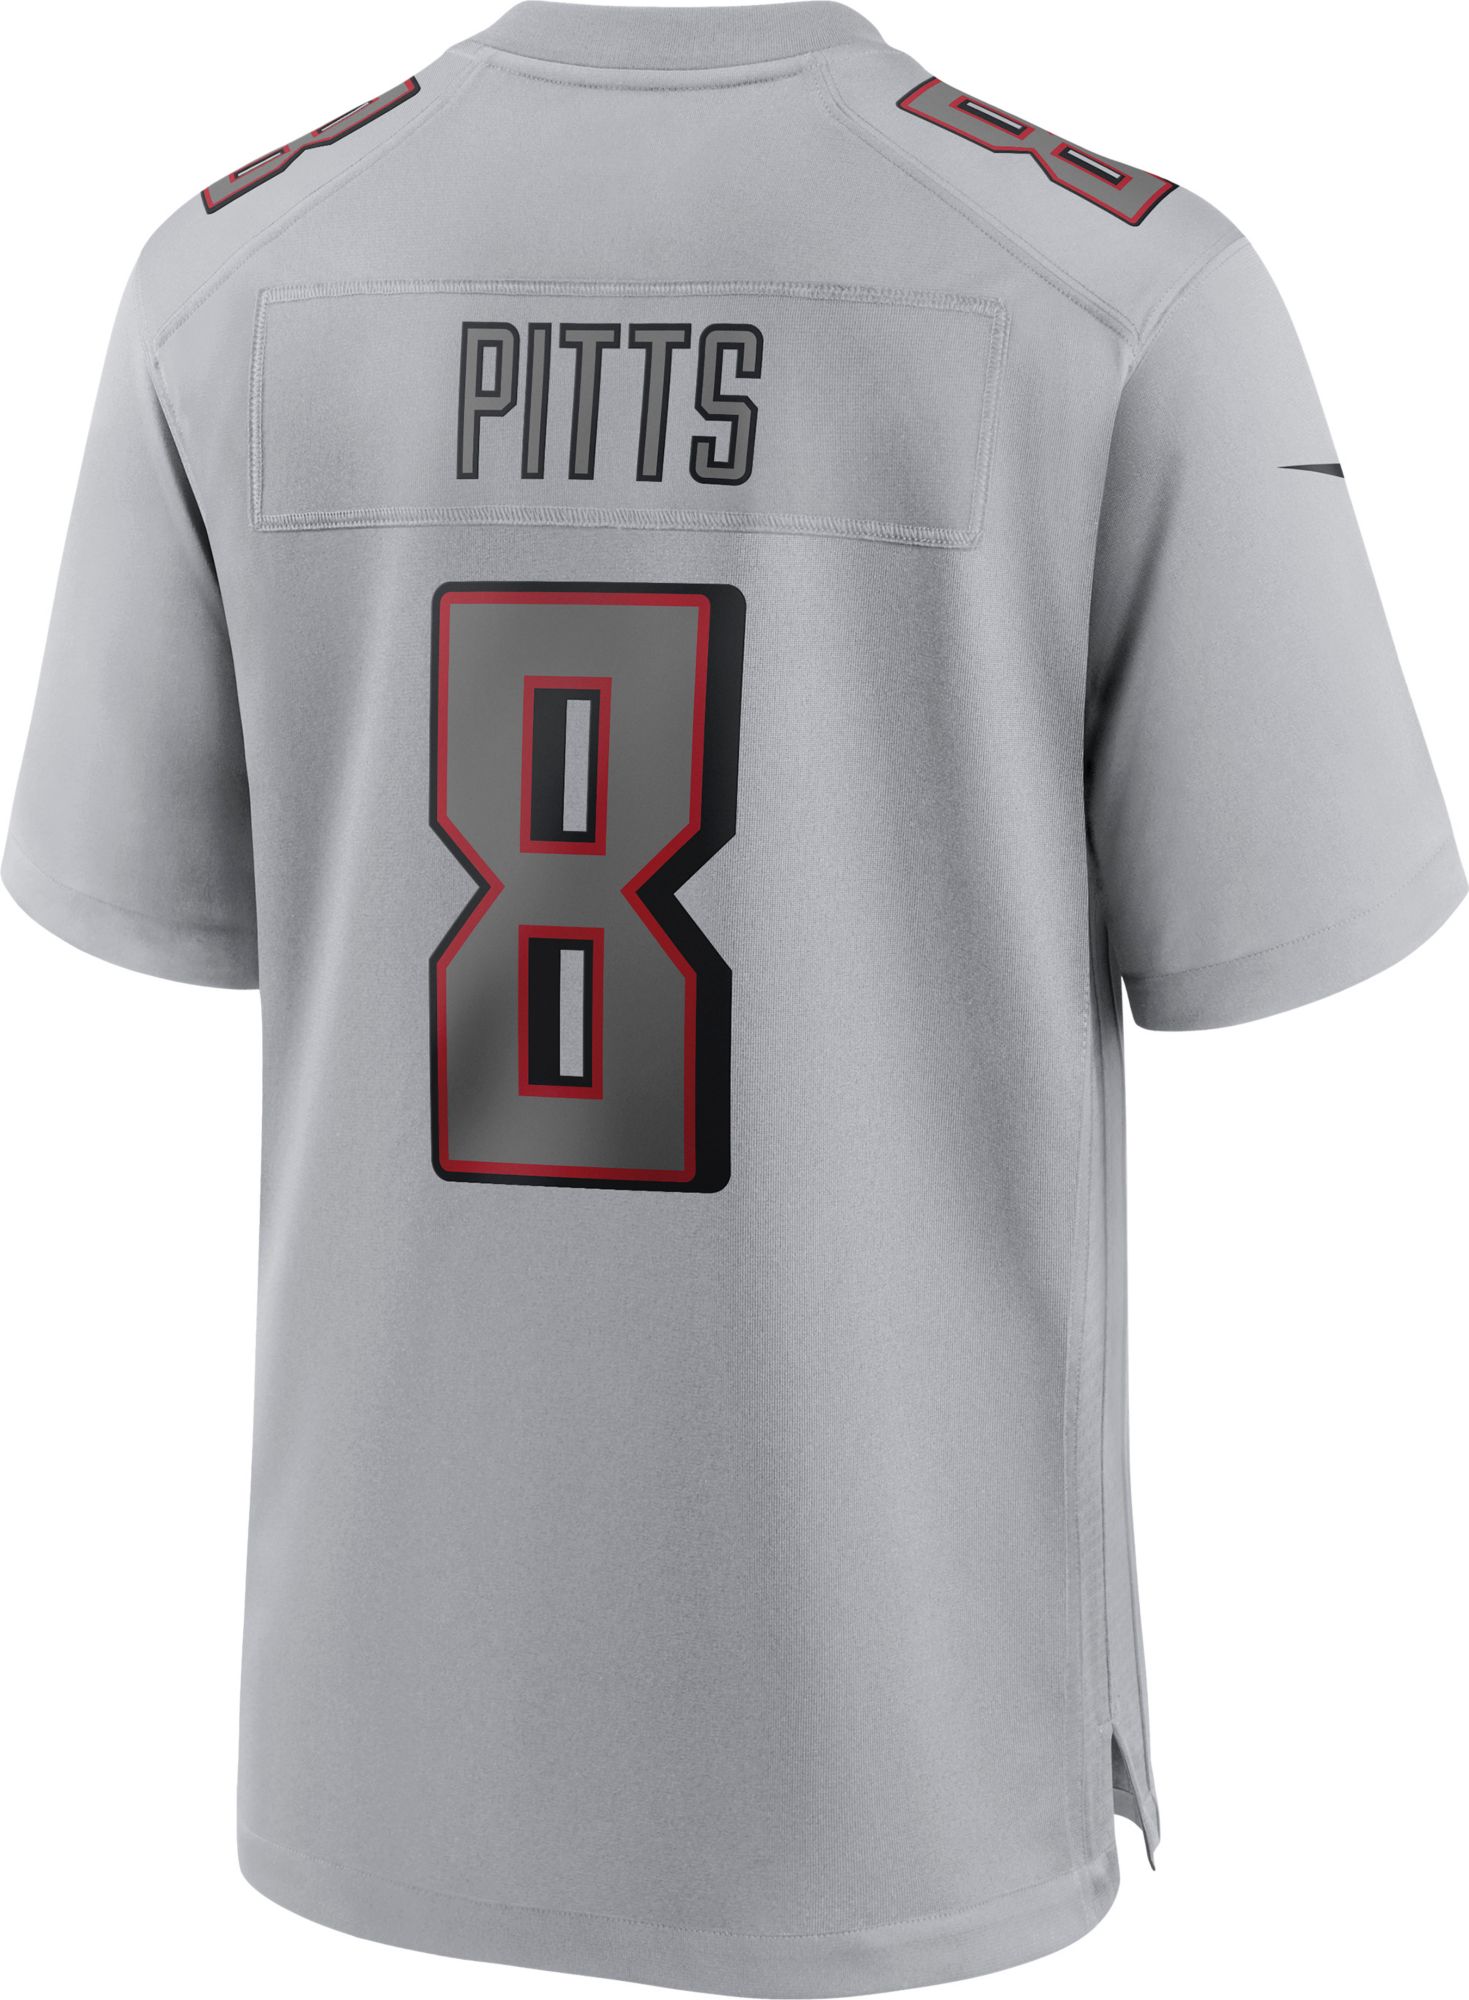 Pitts Kyle youth jersey